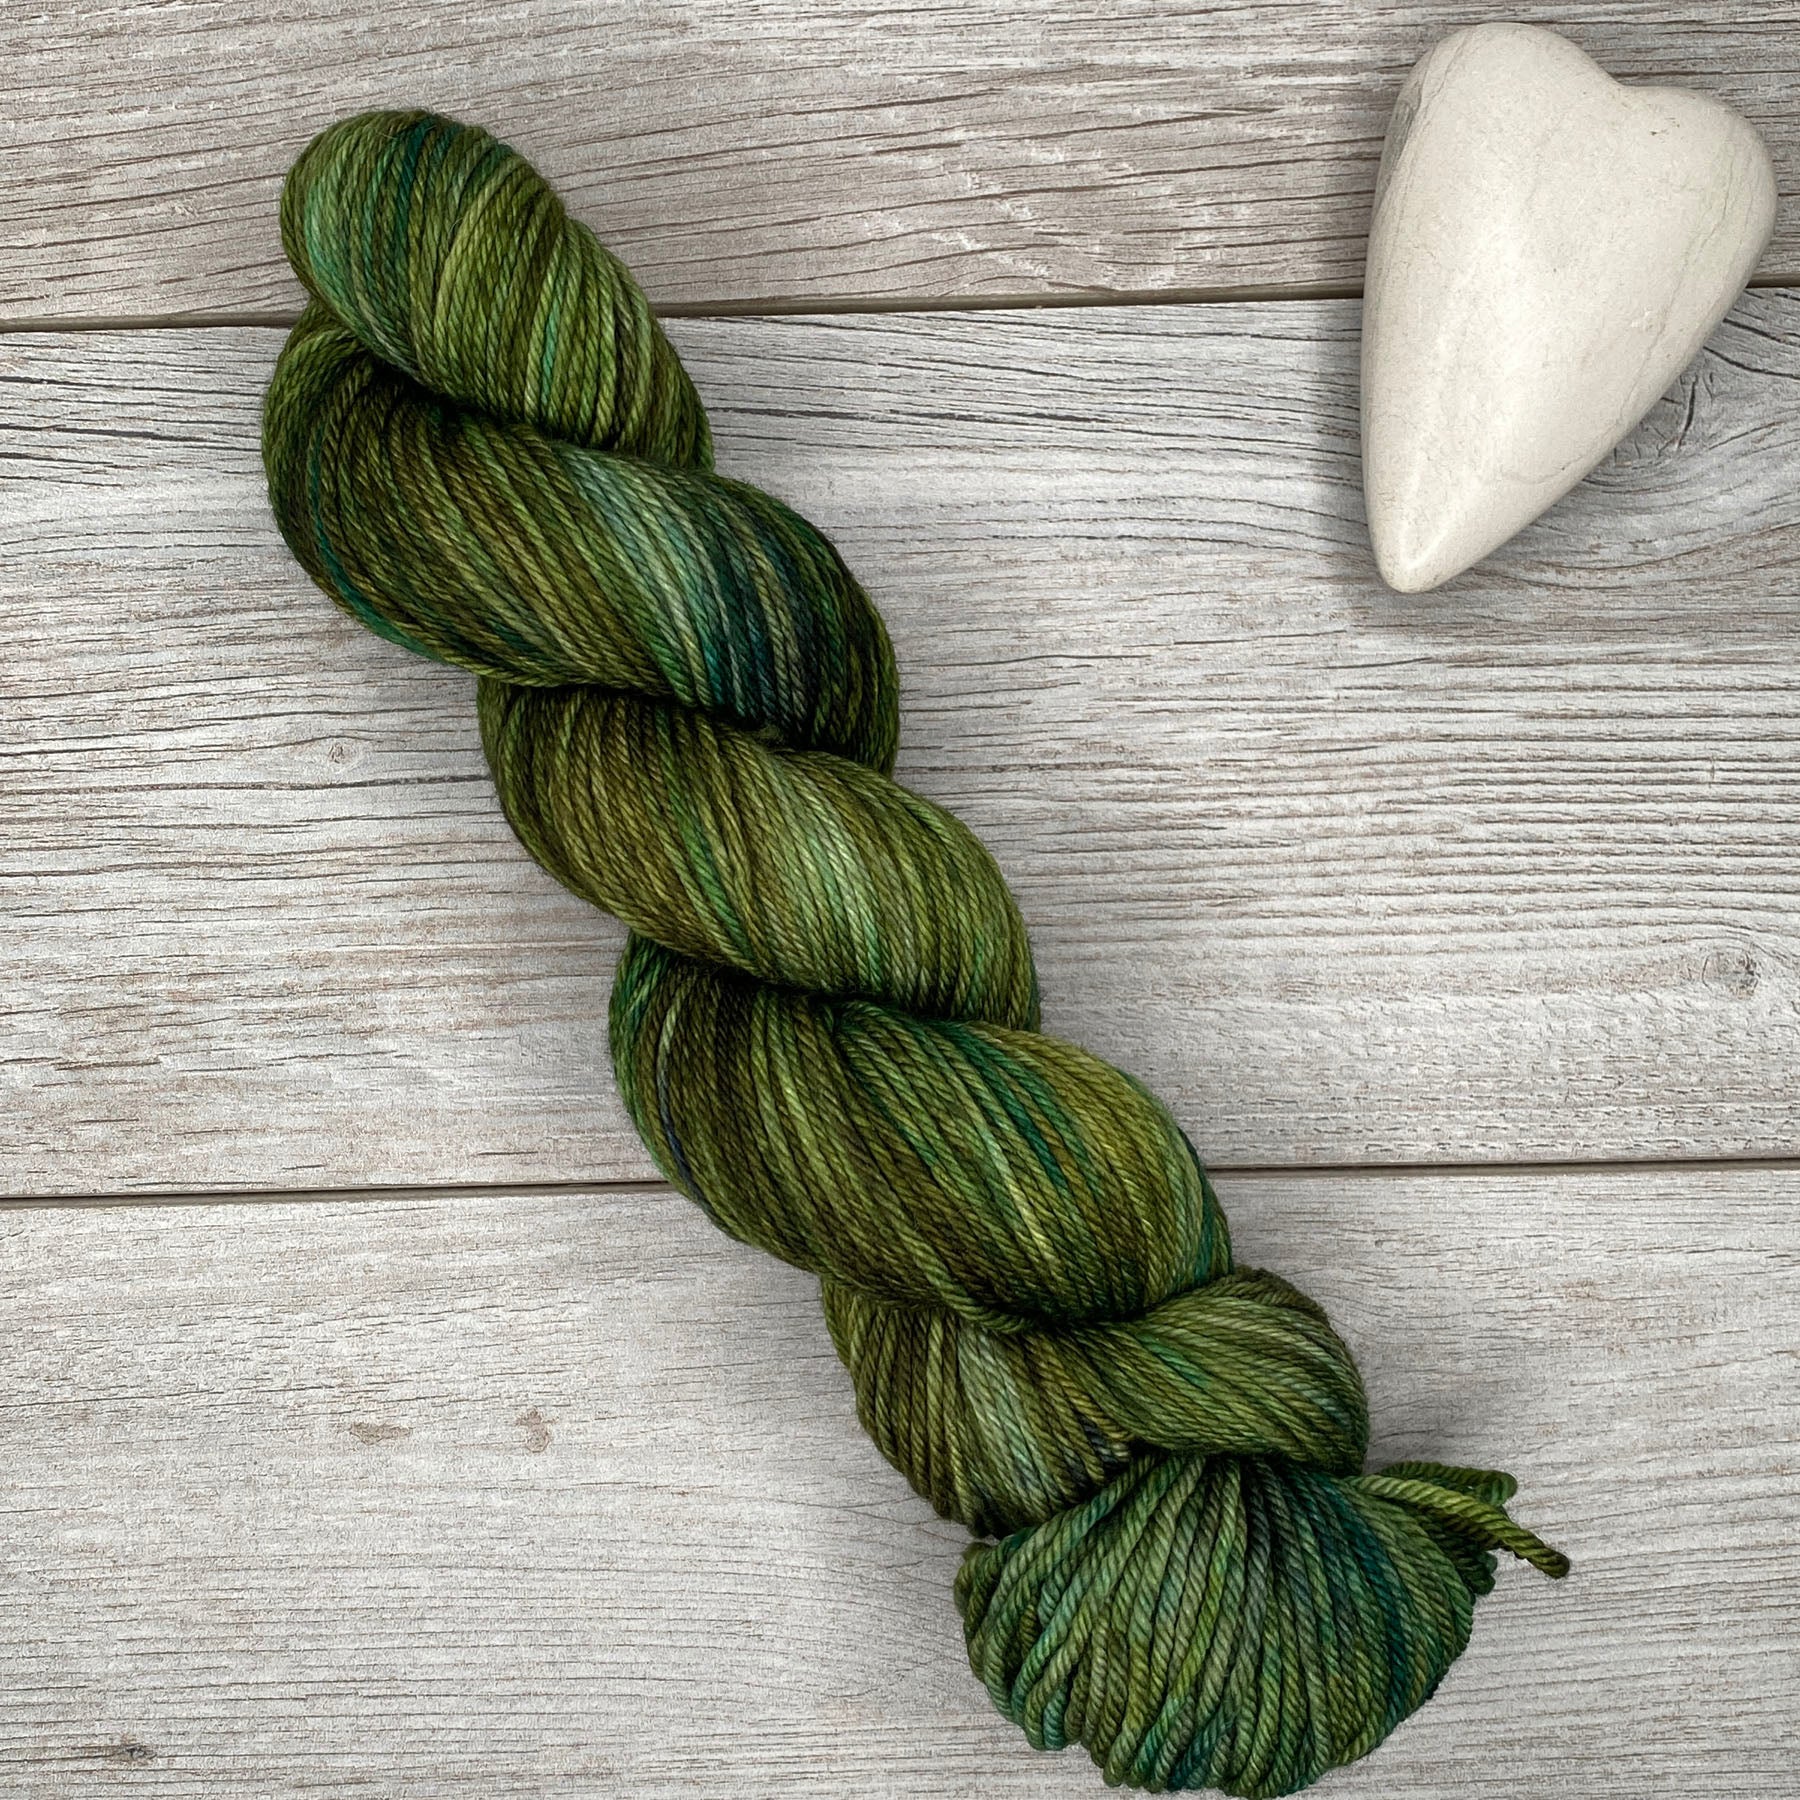 Tintagel  |  RAMbunctious  |  worsted weight